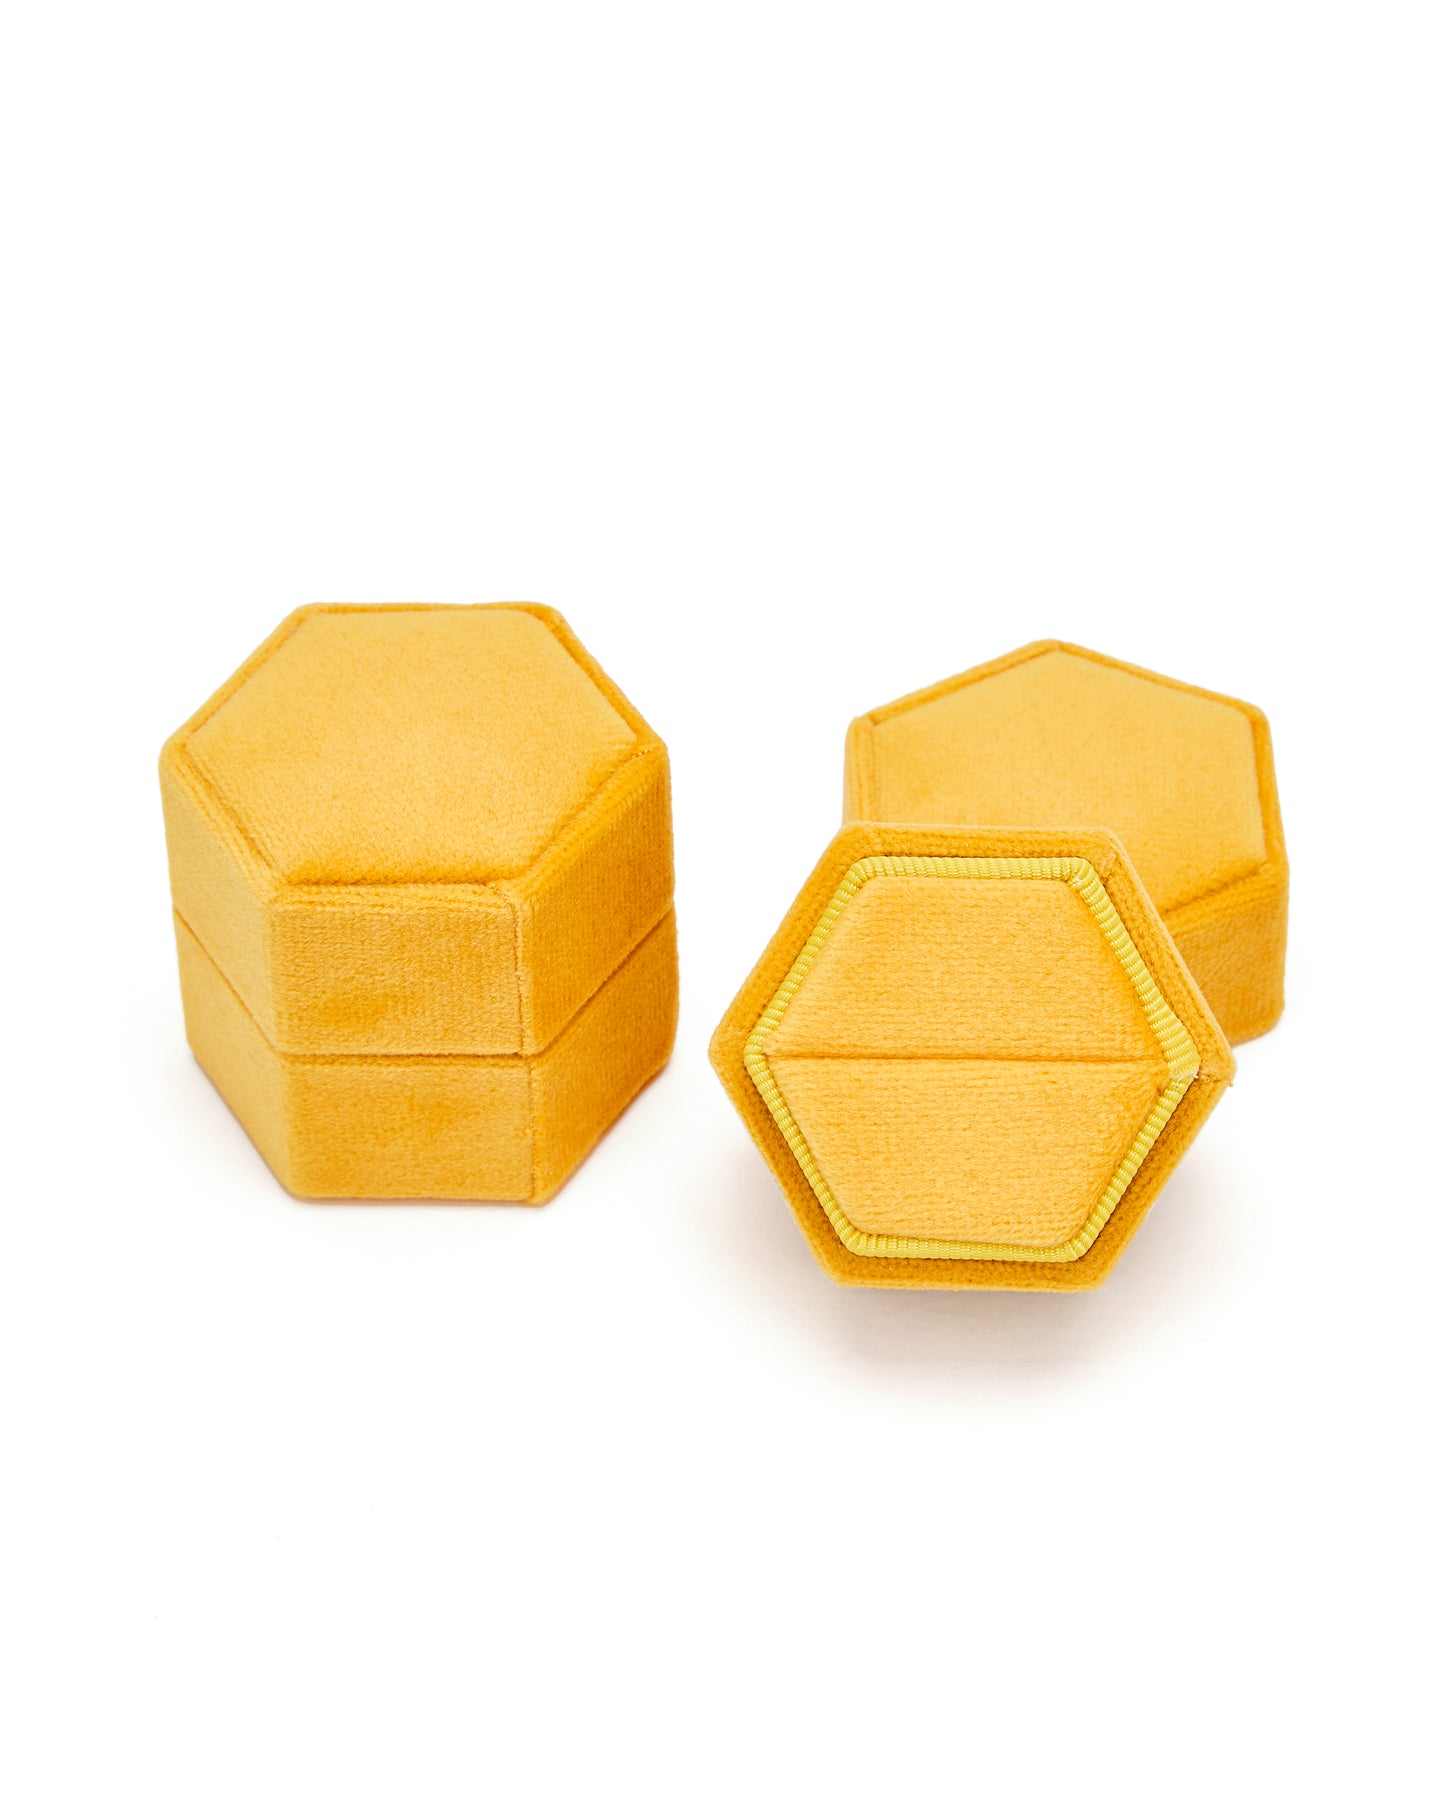 Jewelry case HEXAGON, 25 pieces, Inlay choice: ring/ring pair